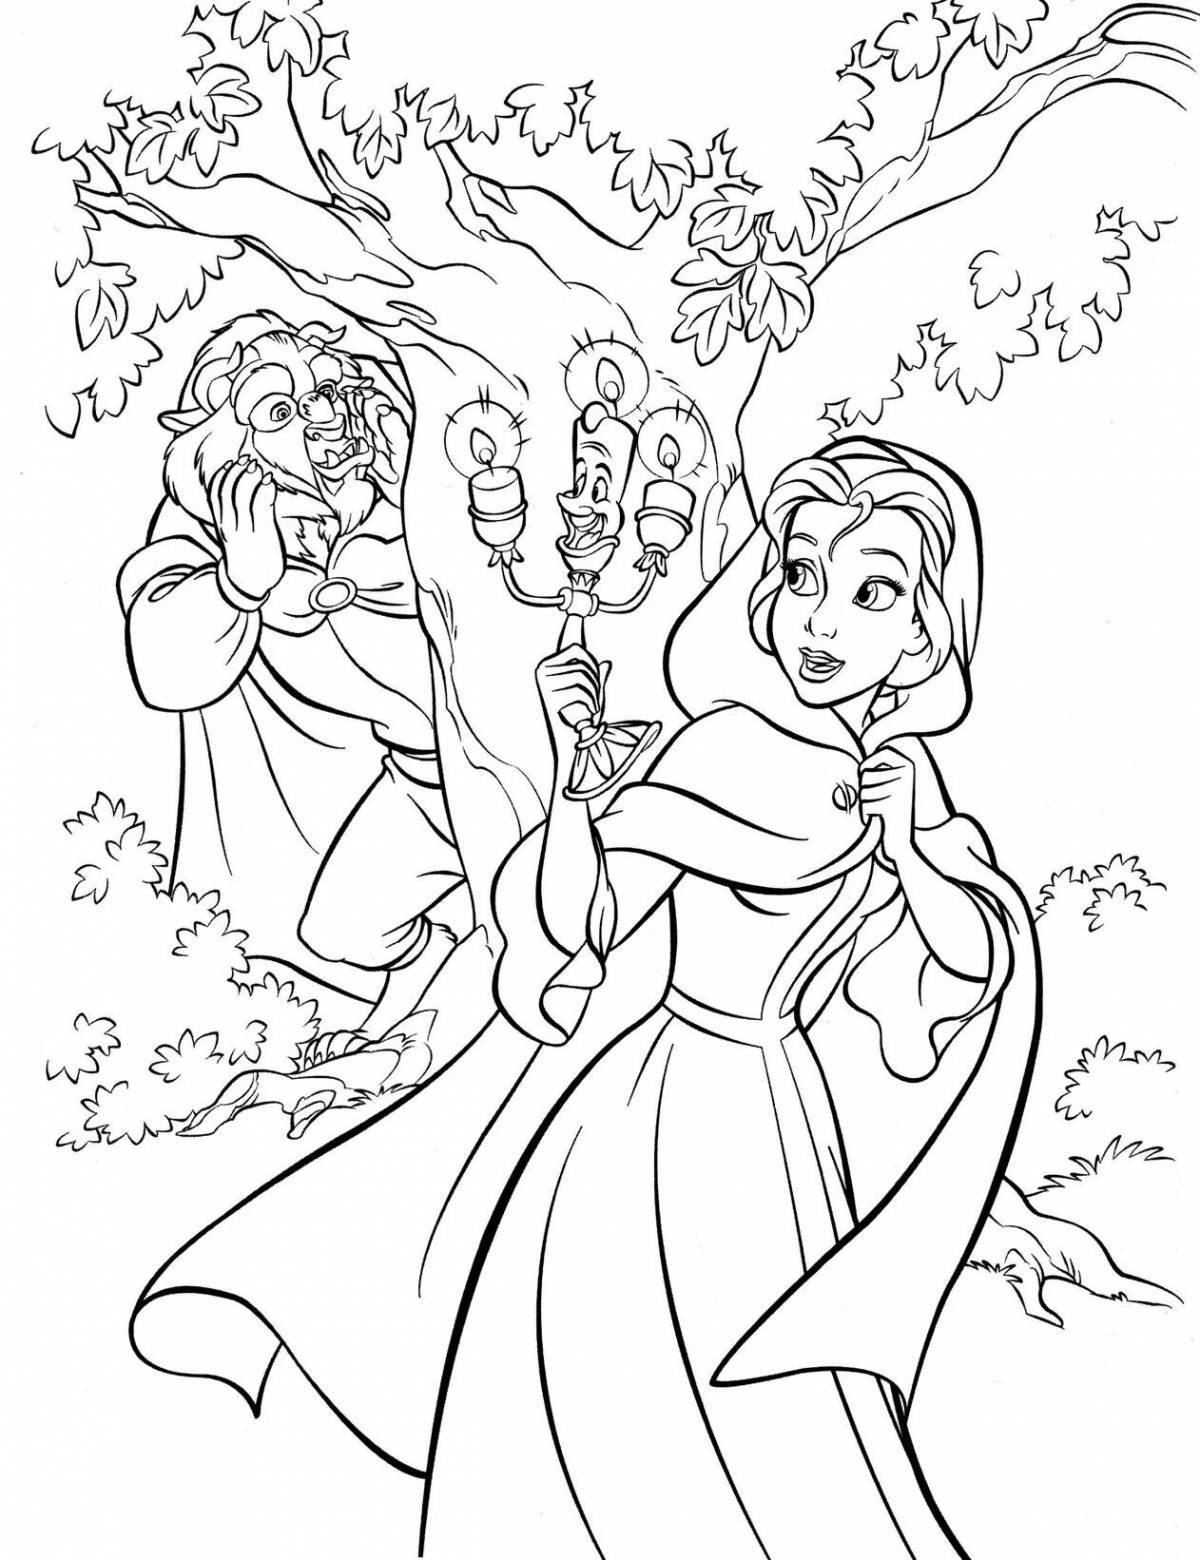 Colorful belle princess coloring page